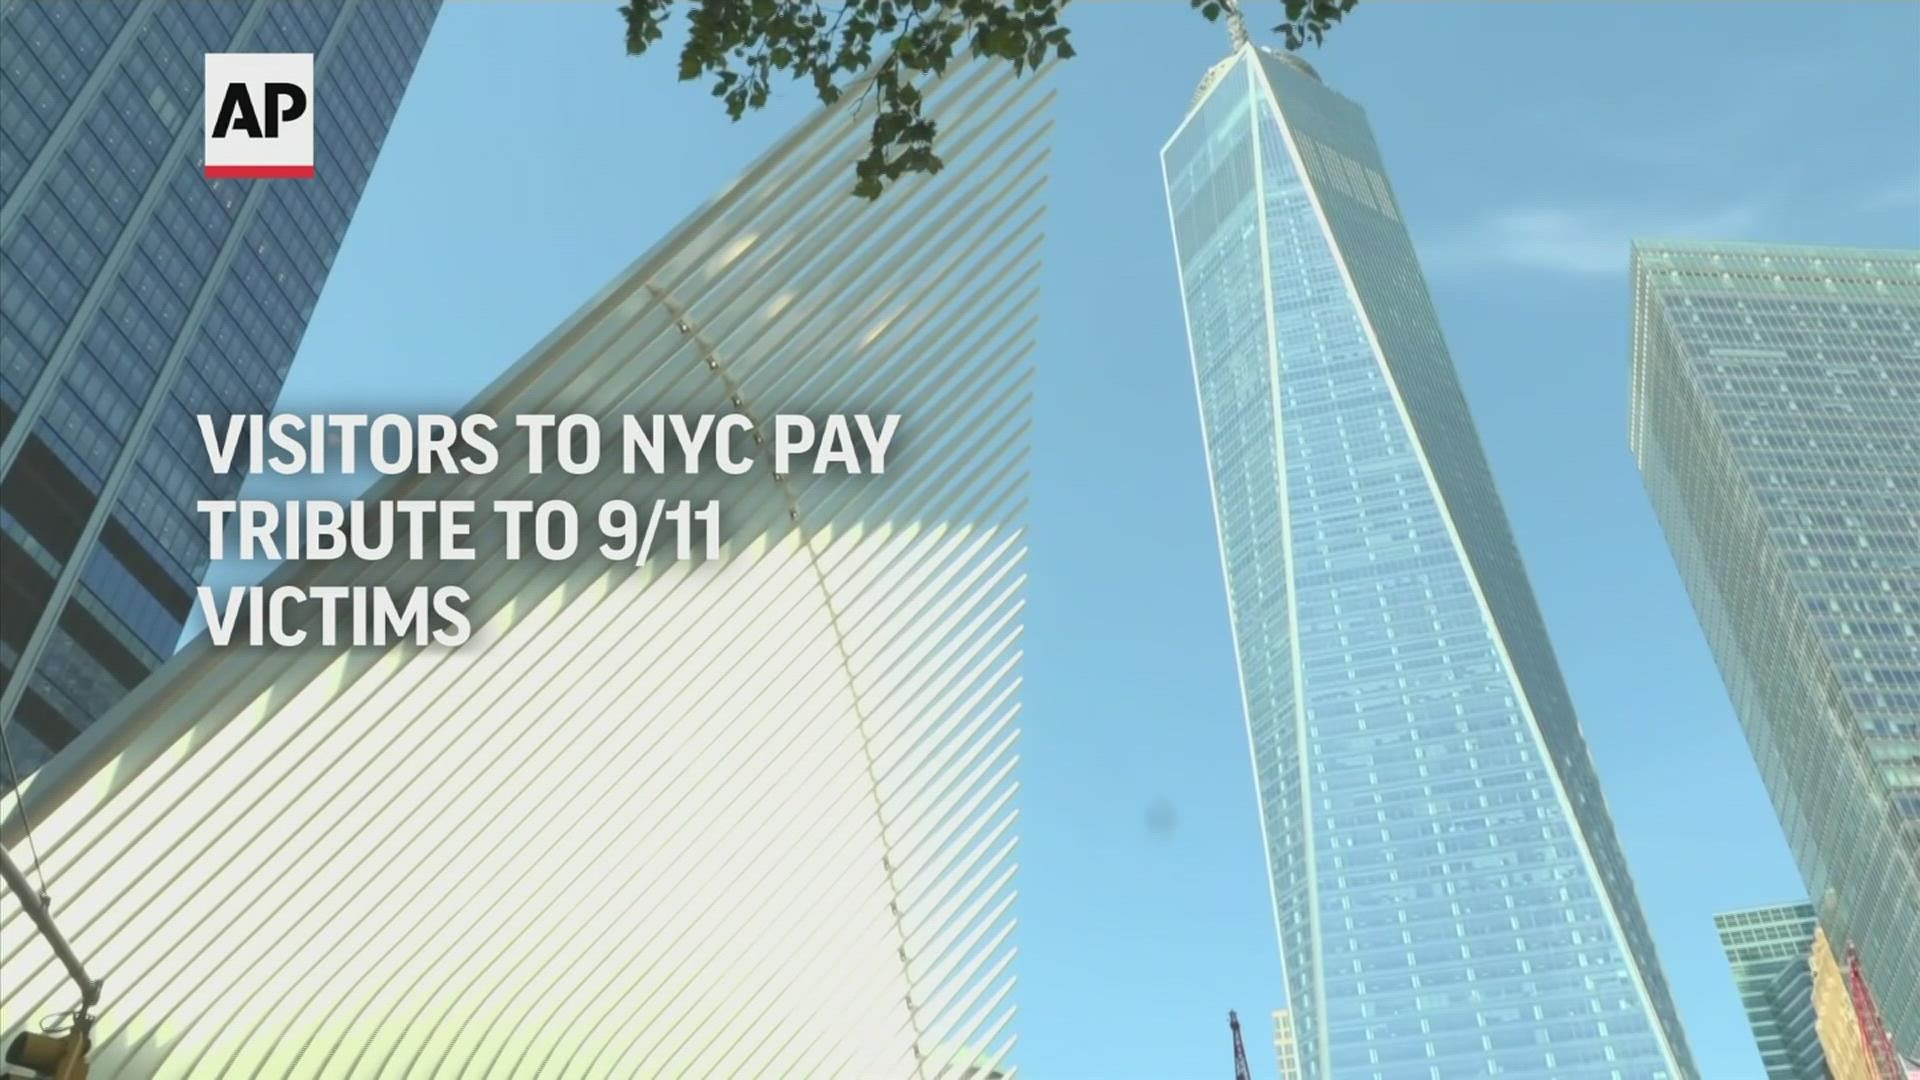 Visitors to lower Manhattan described a feeling of loss and thankfulness on the 20th anniversary of the 9/11 attacks.